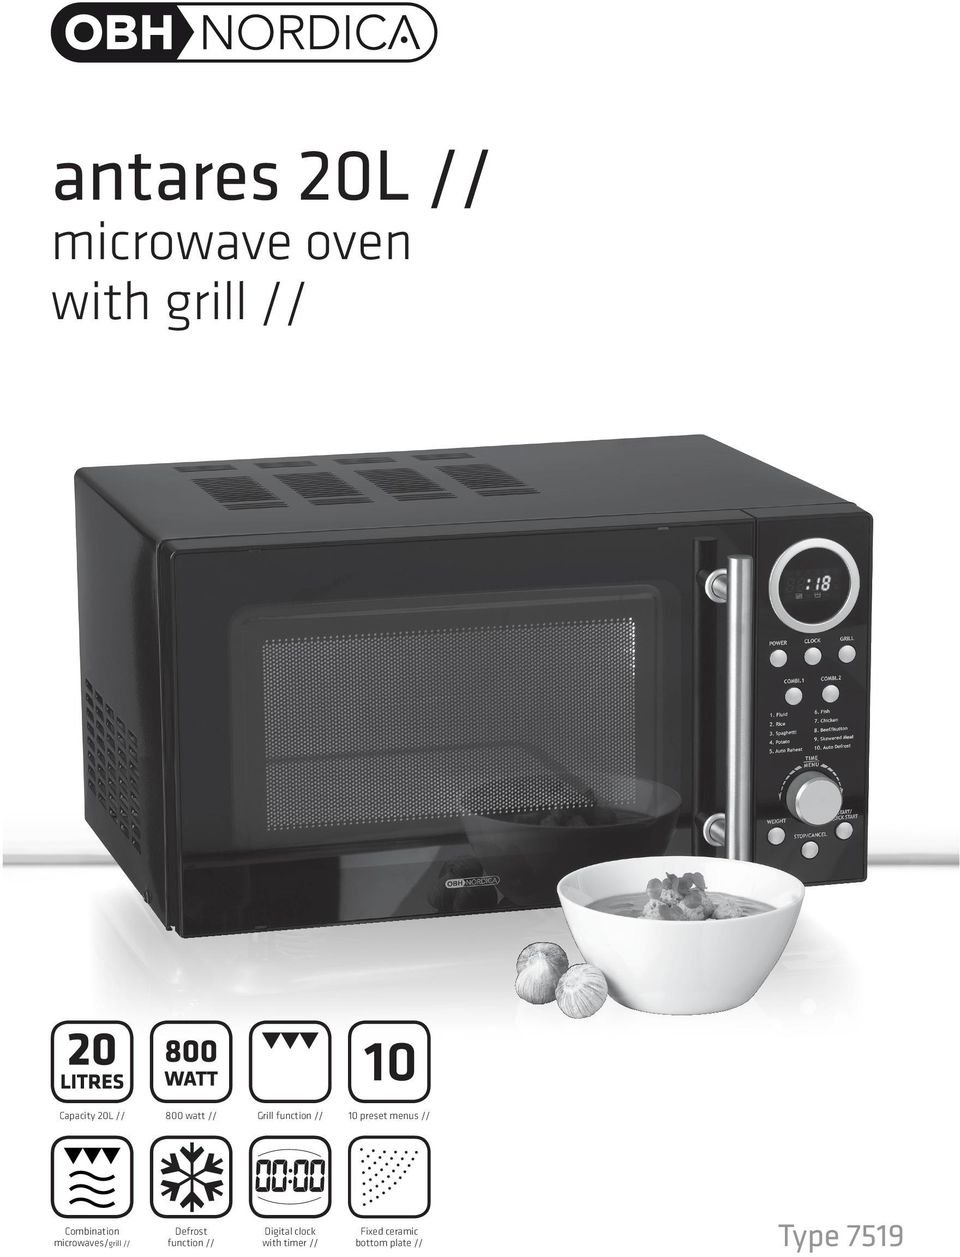 microwaves/grill // Defrost function // Digital clock with timer